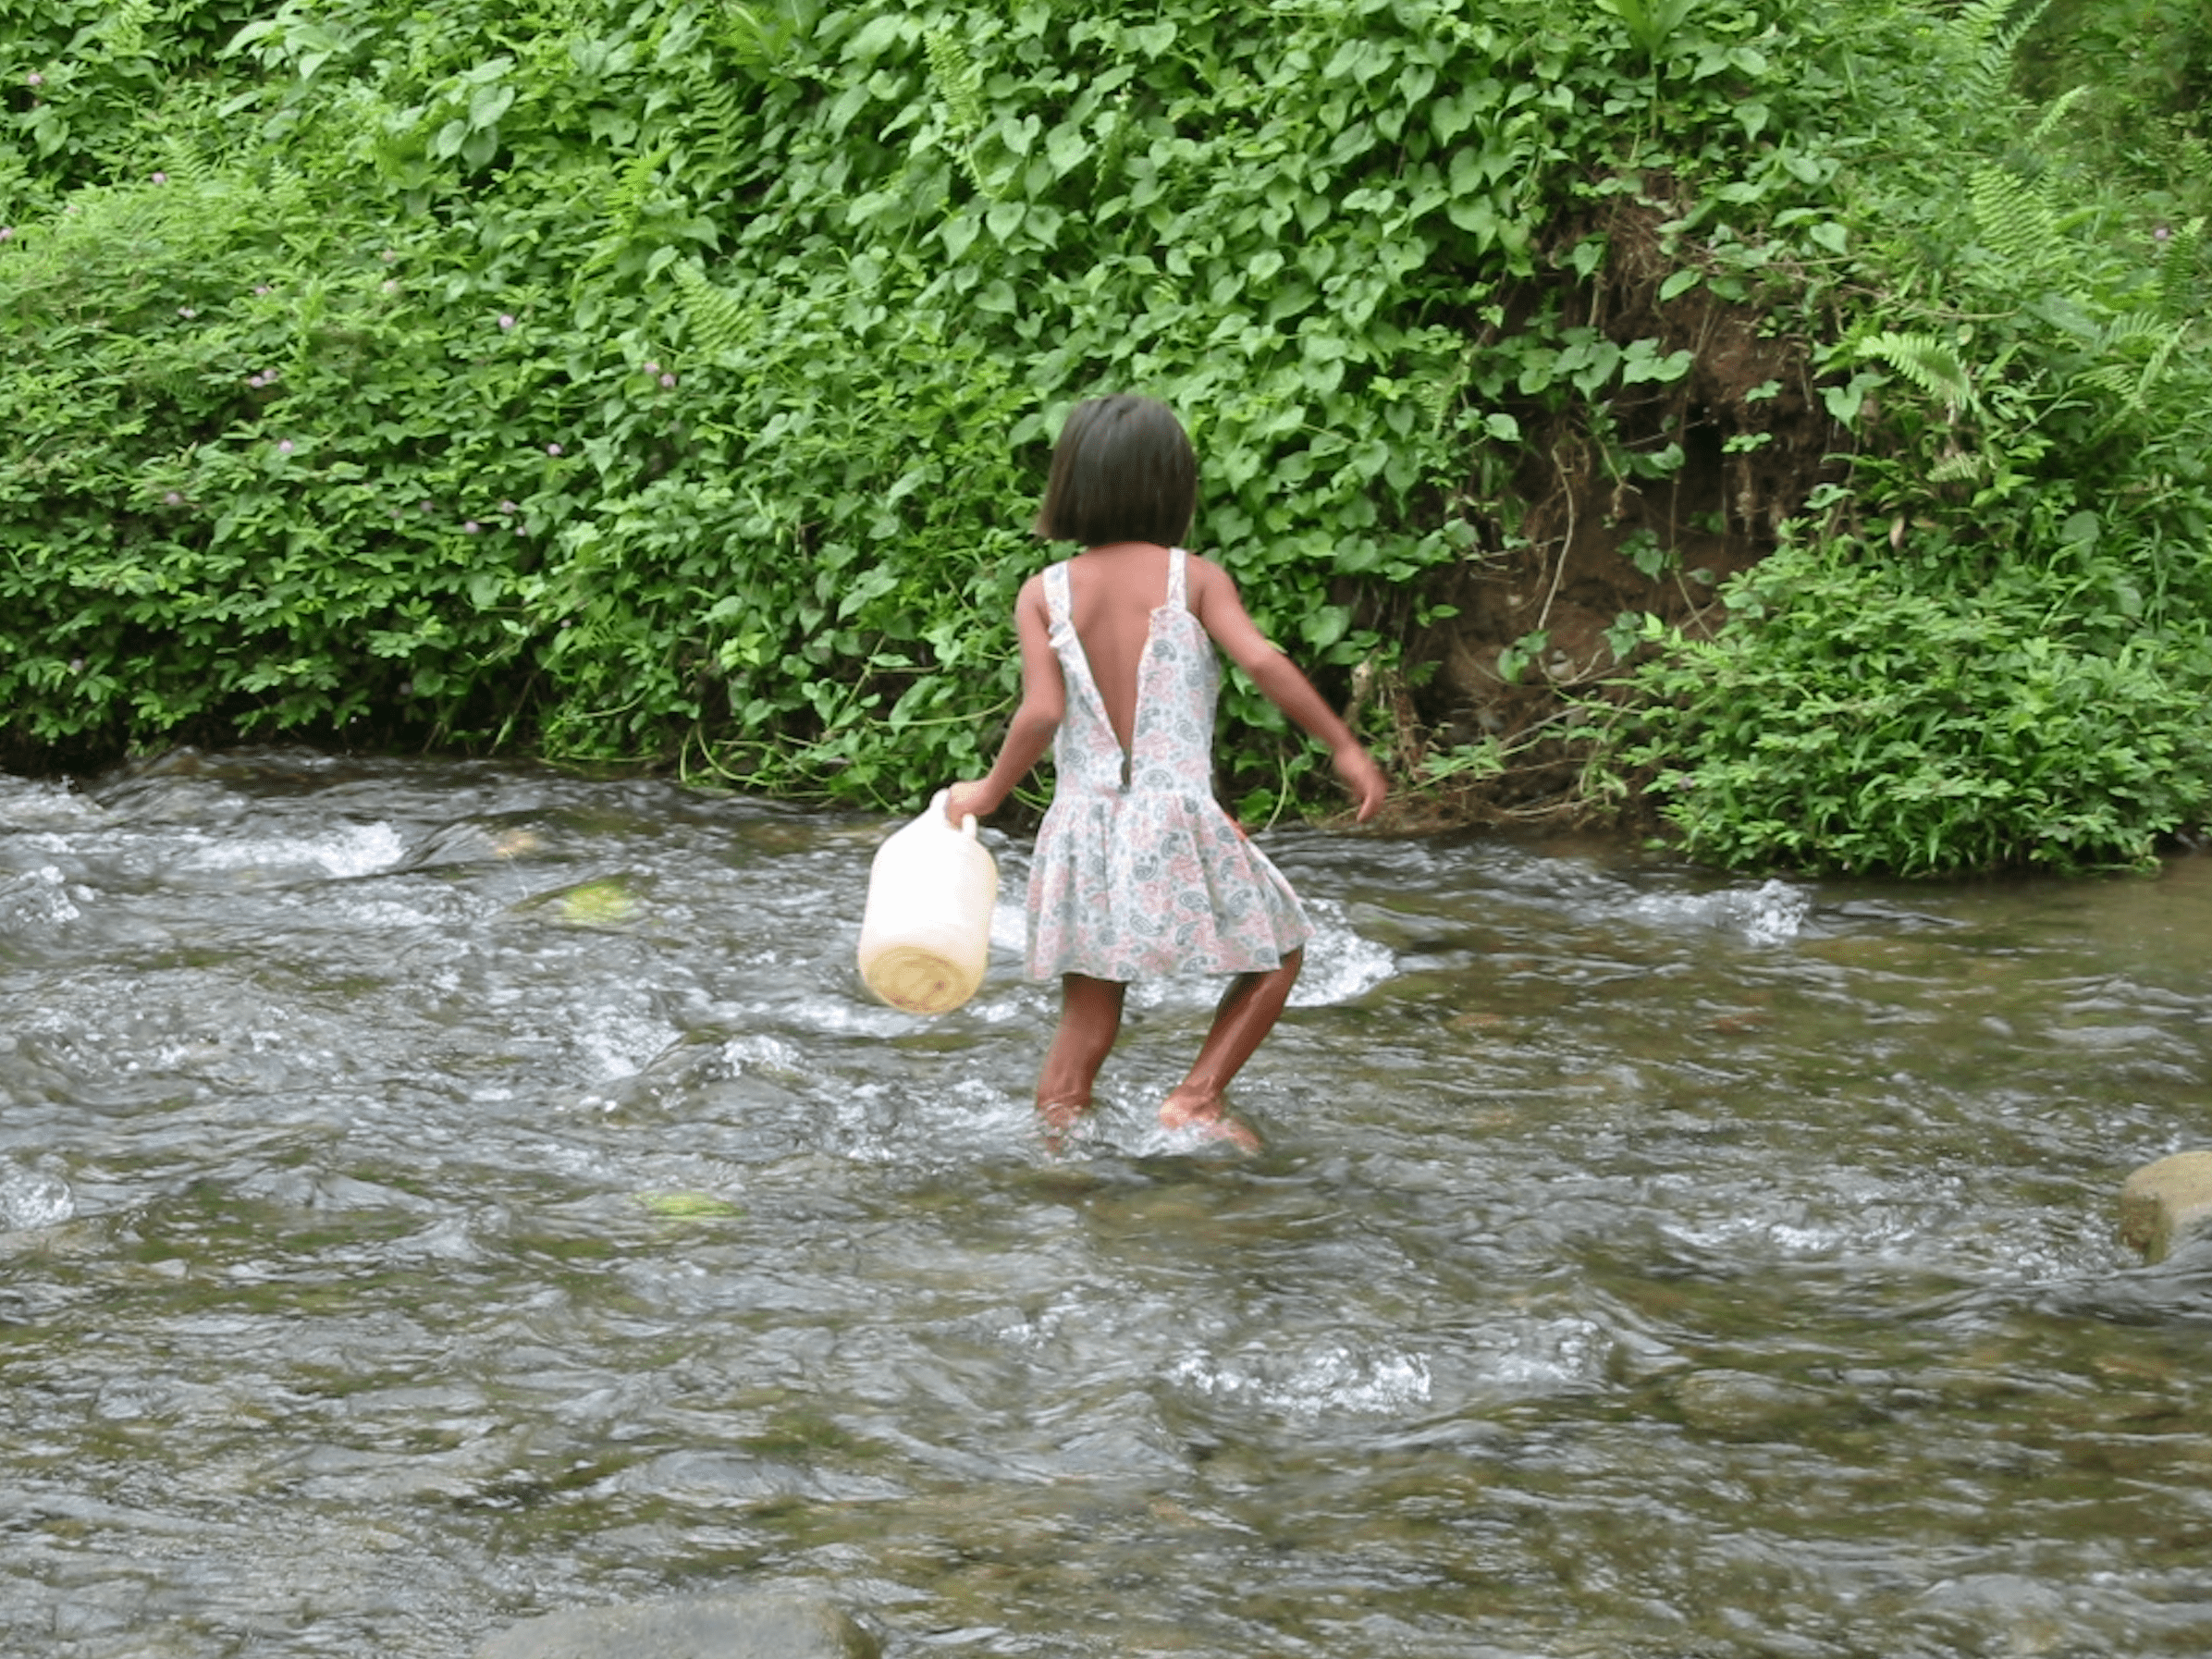 Young girl filling up a jug of water in a river.